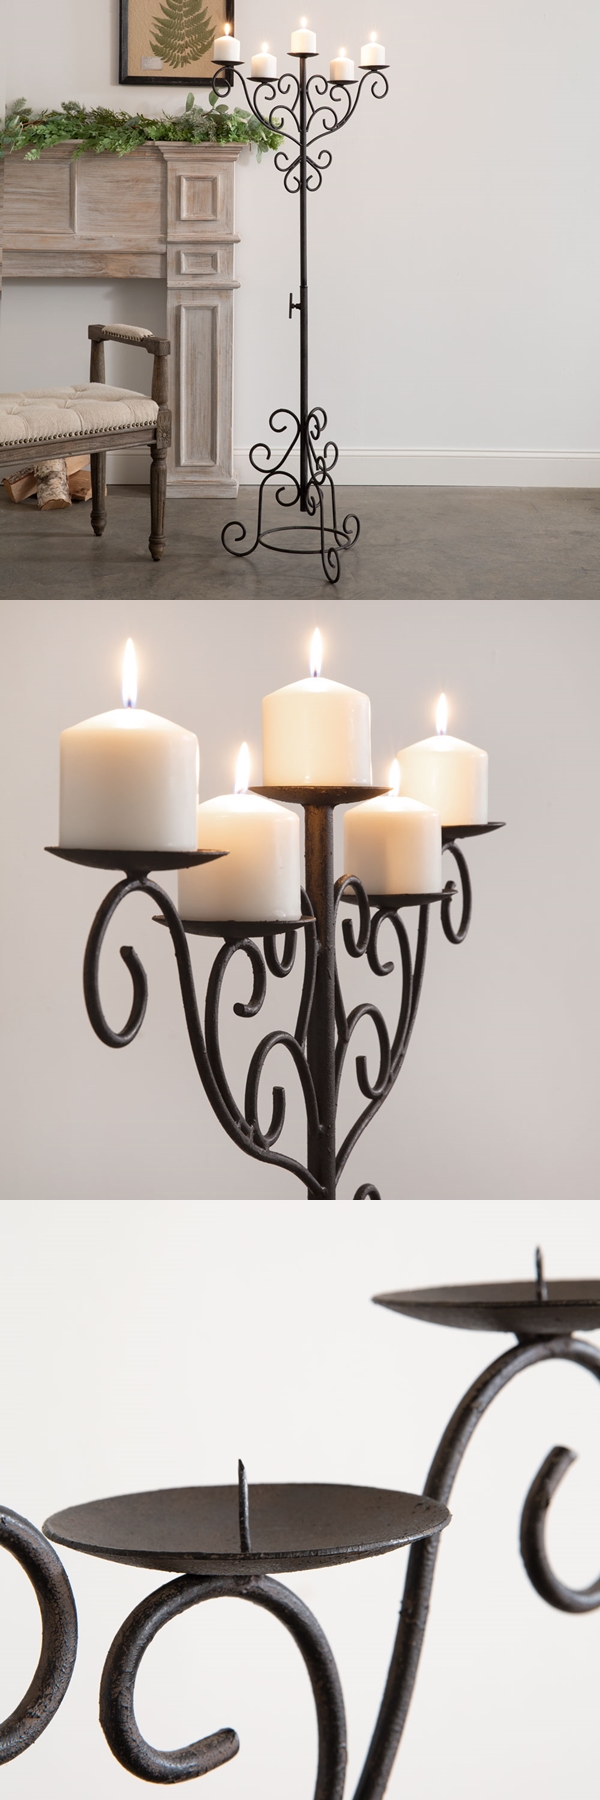 CTW Home Collection Vintage-Inspired Wrought-Iron Floor Candelabra